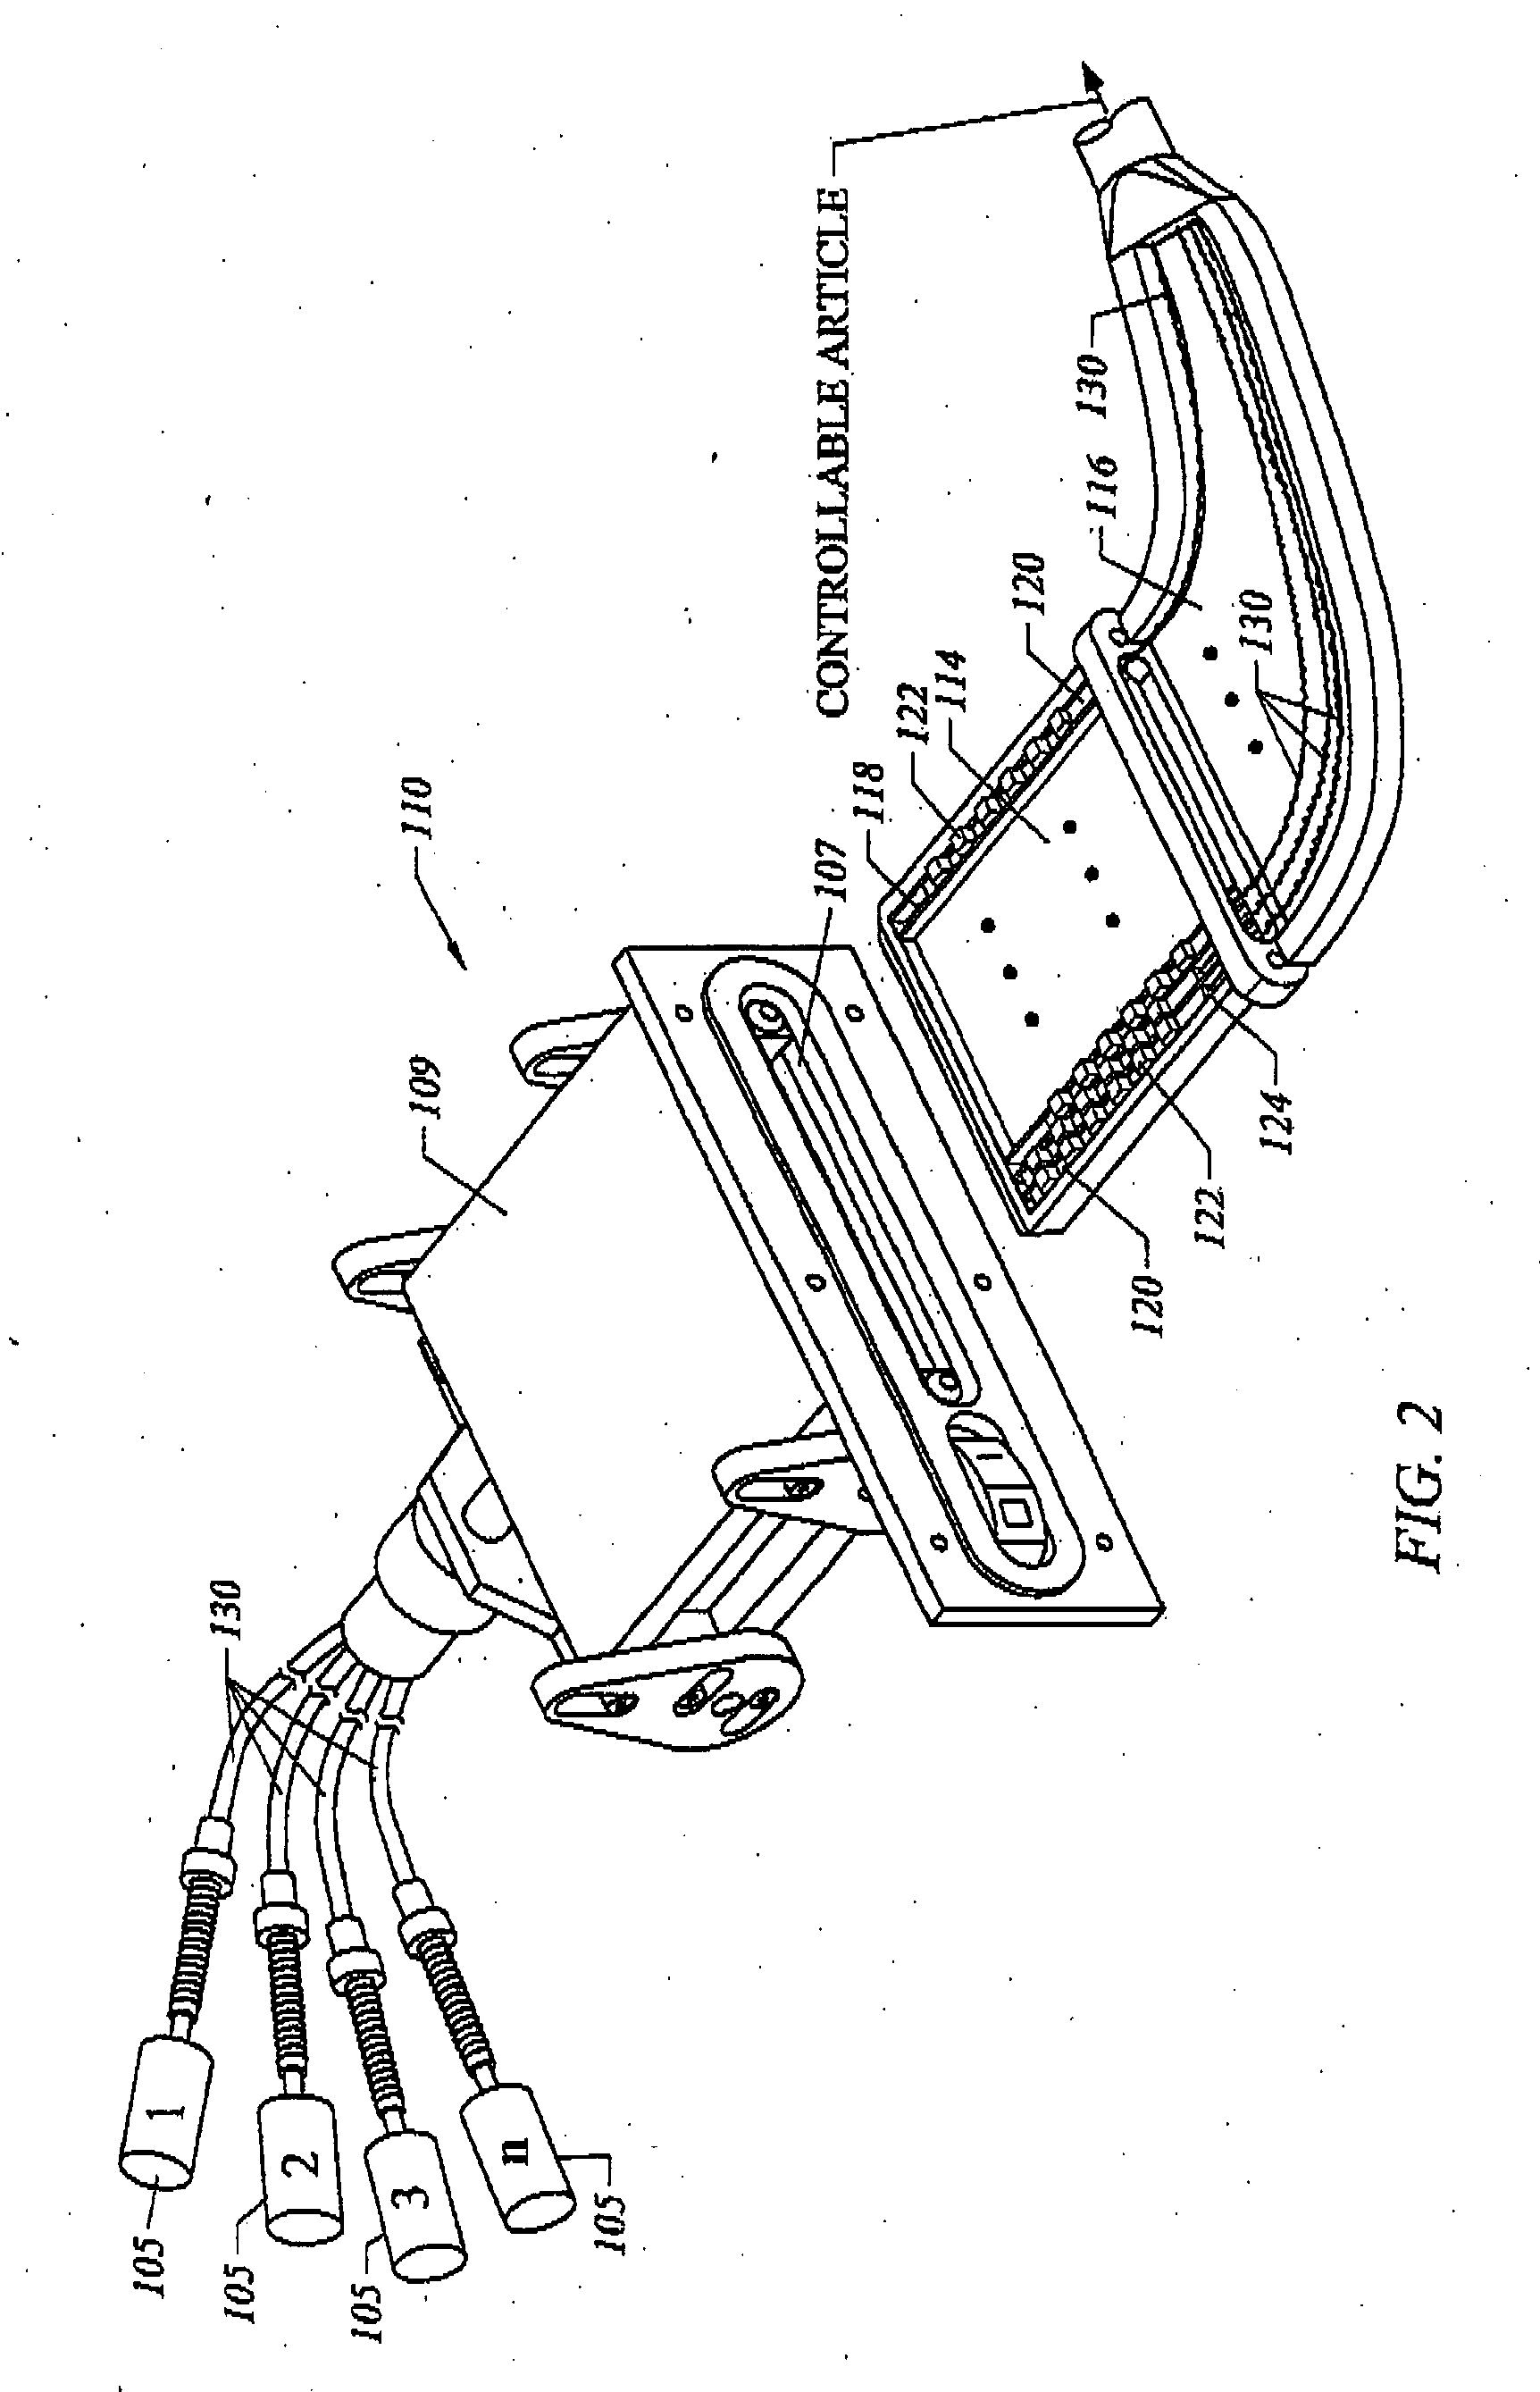 Connector device for a controllable instrument